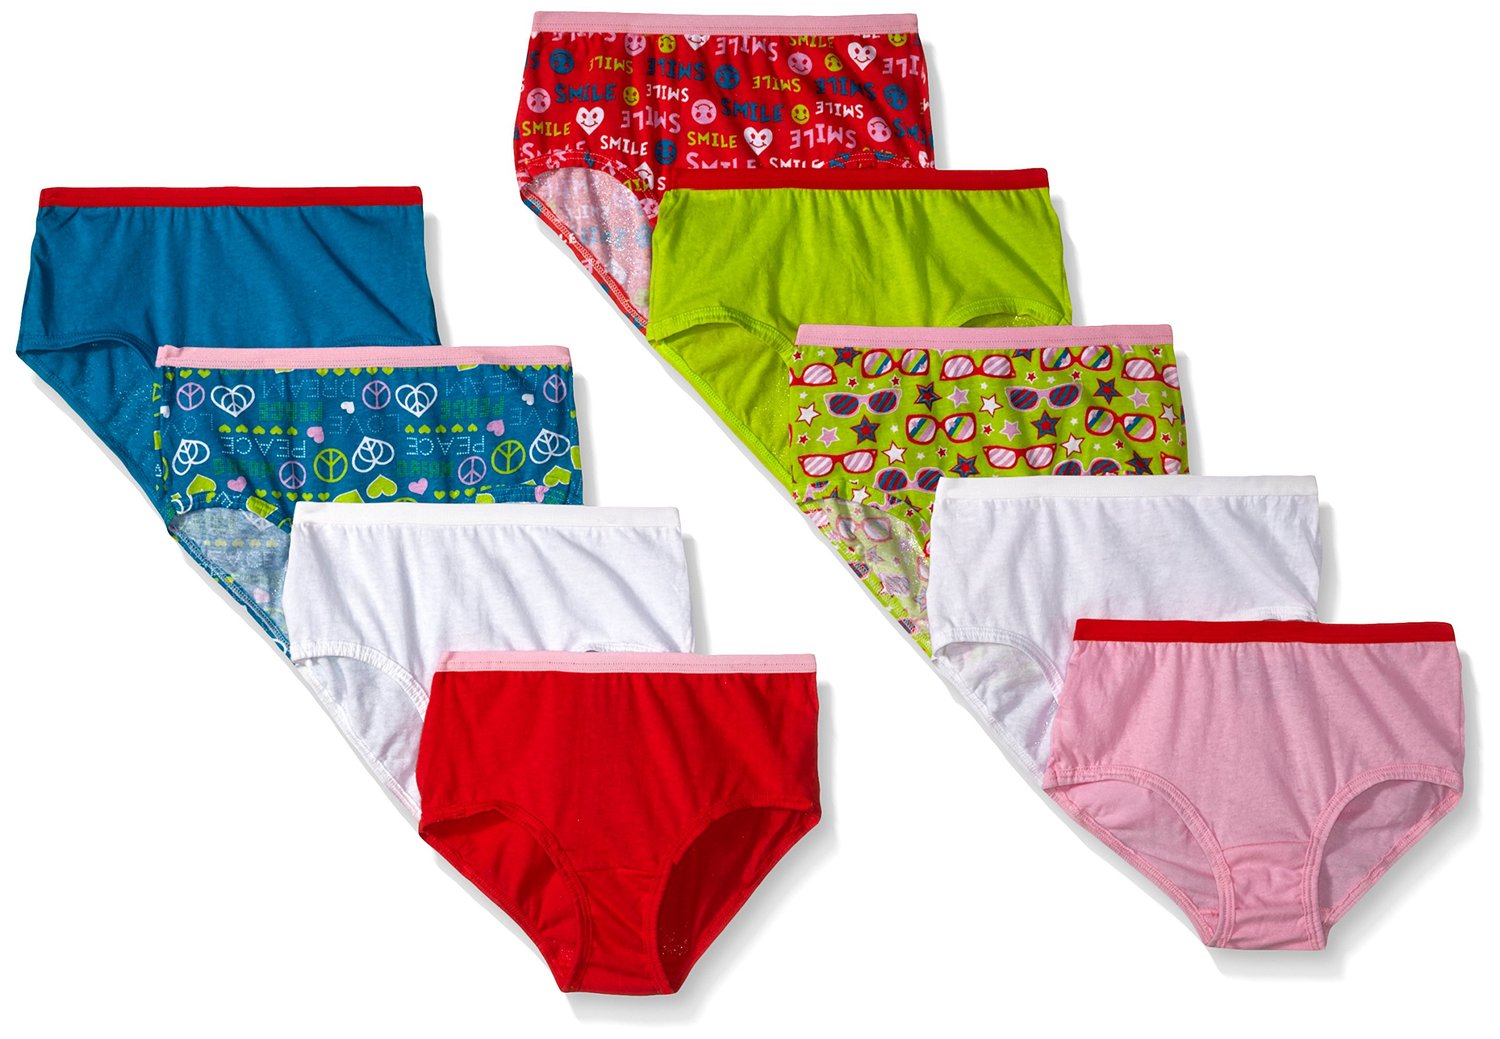 Fruit Of The Loom Women's 10pk Cotton Briefs - Colors May Vary 10